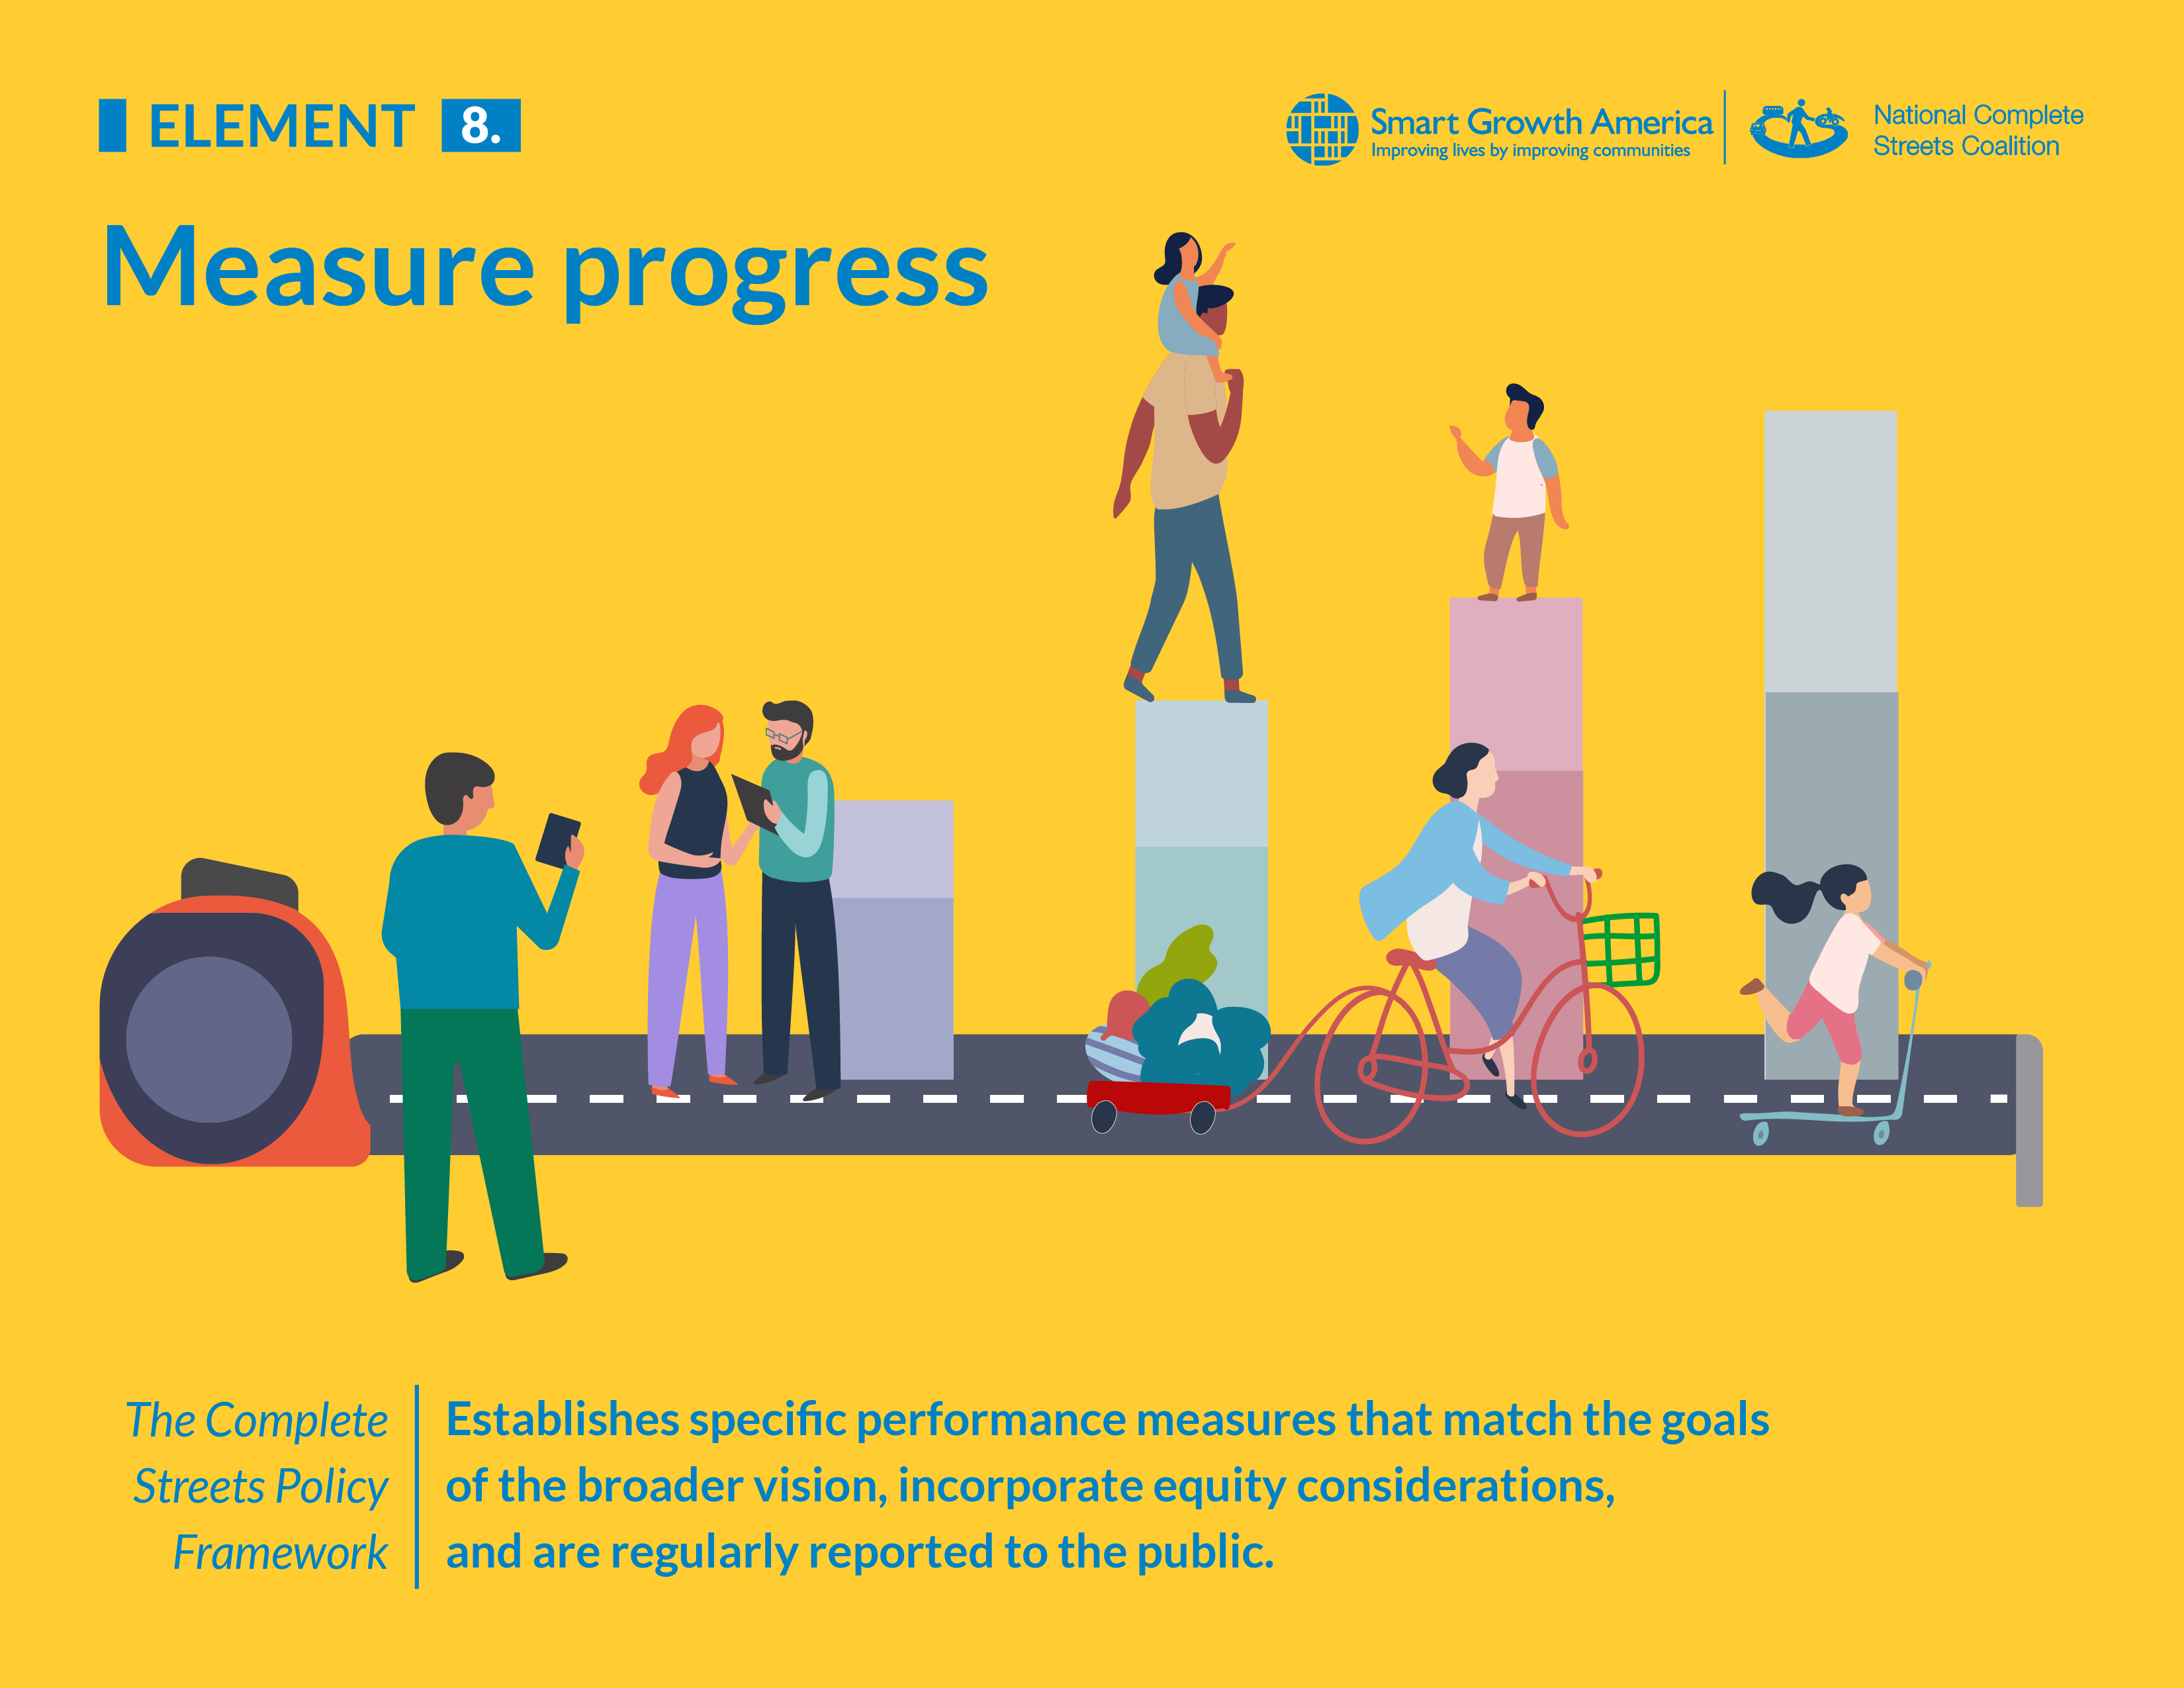 A strong Complete Streets policy measures progress (element #8)